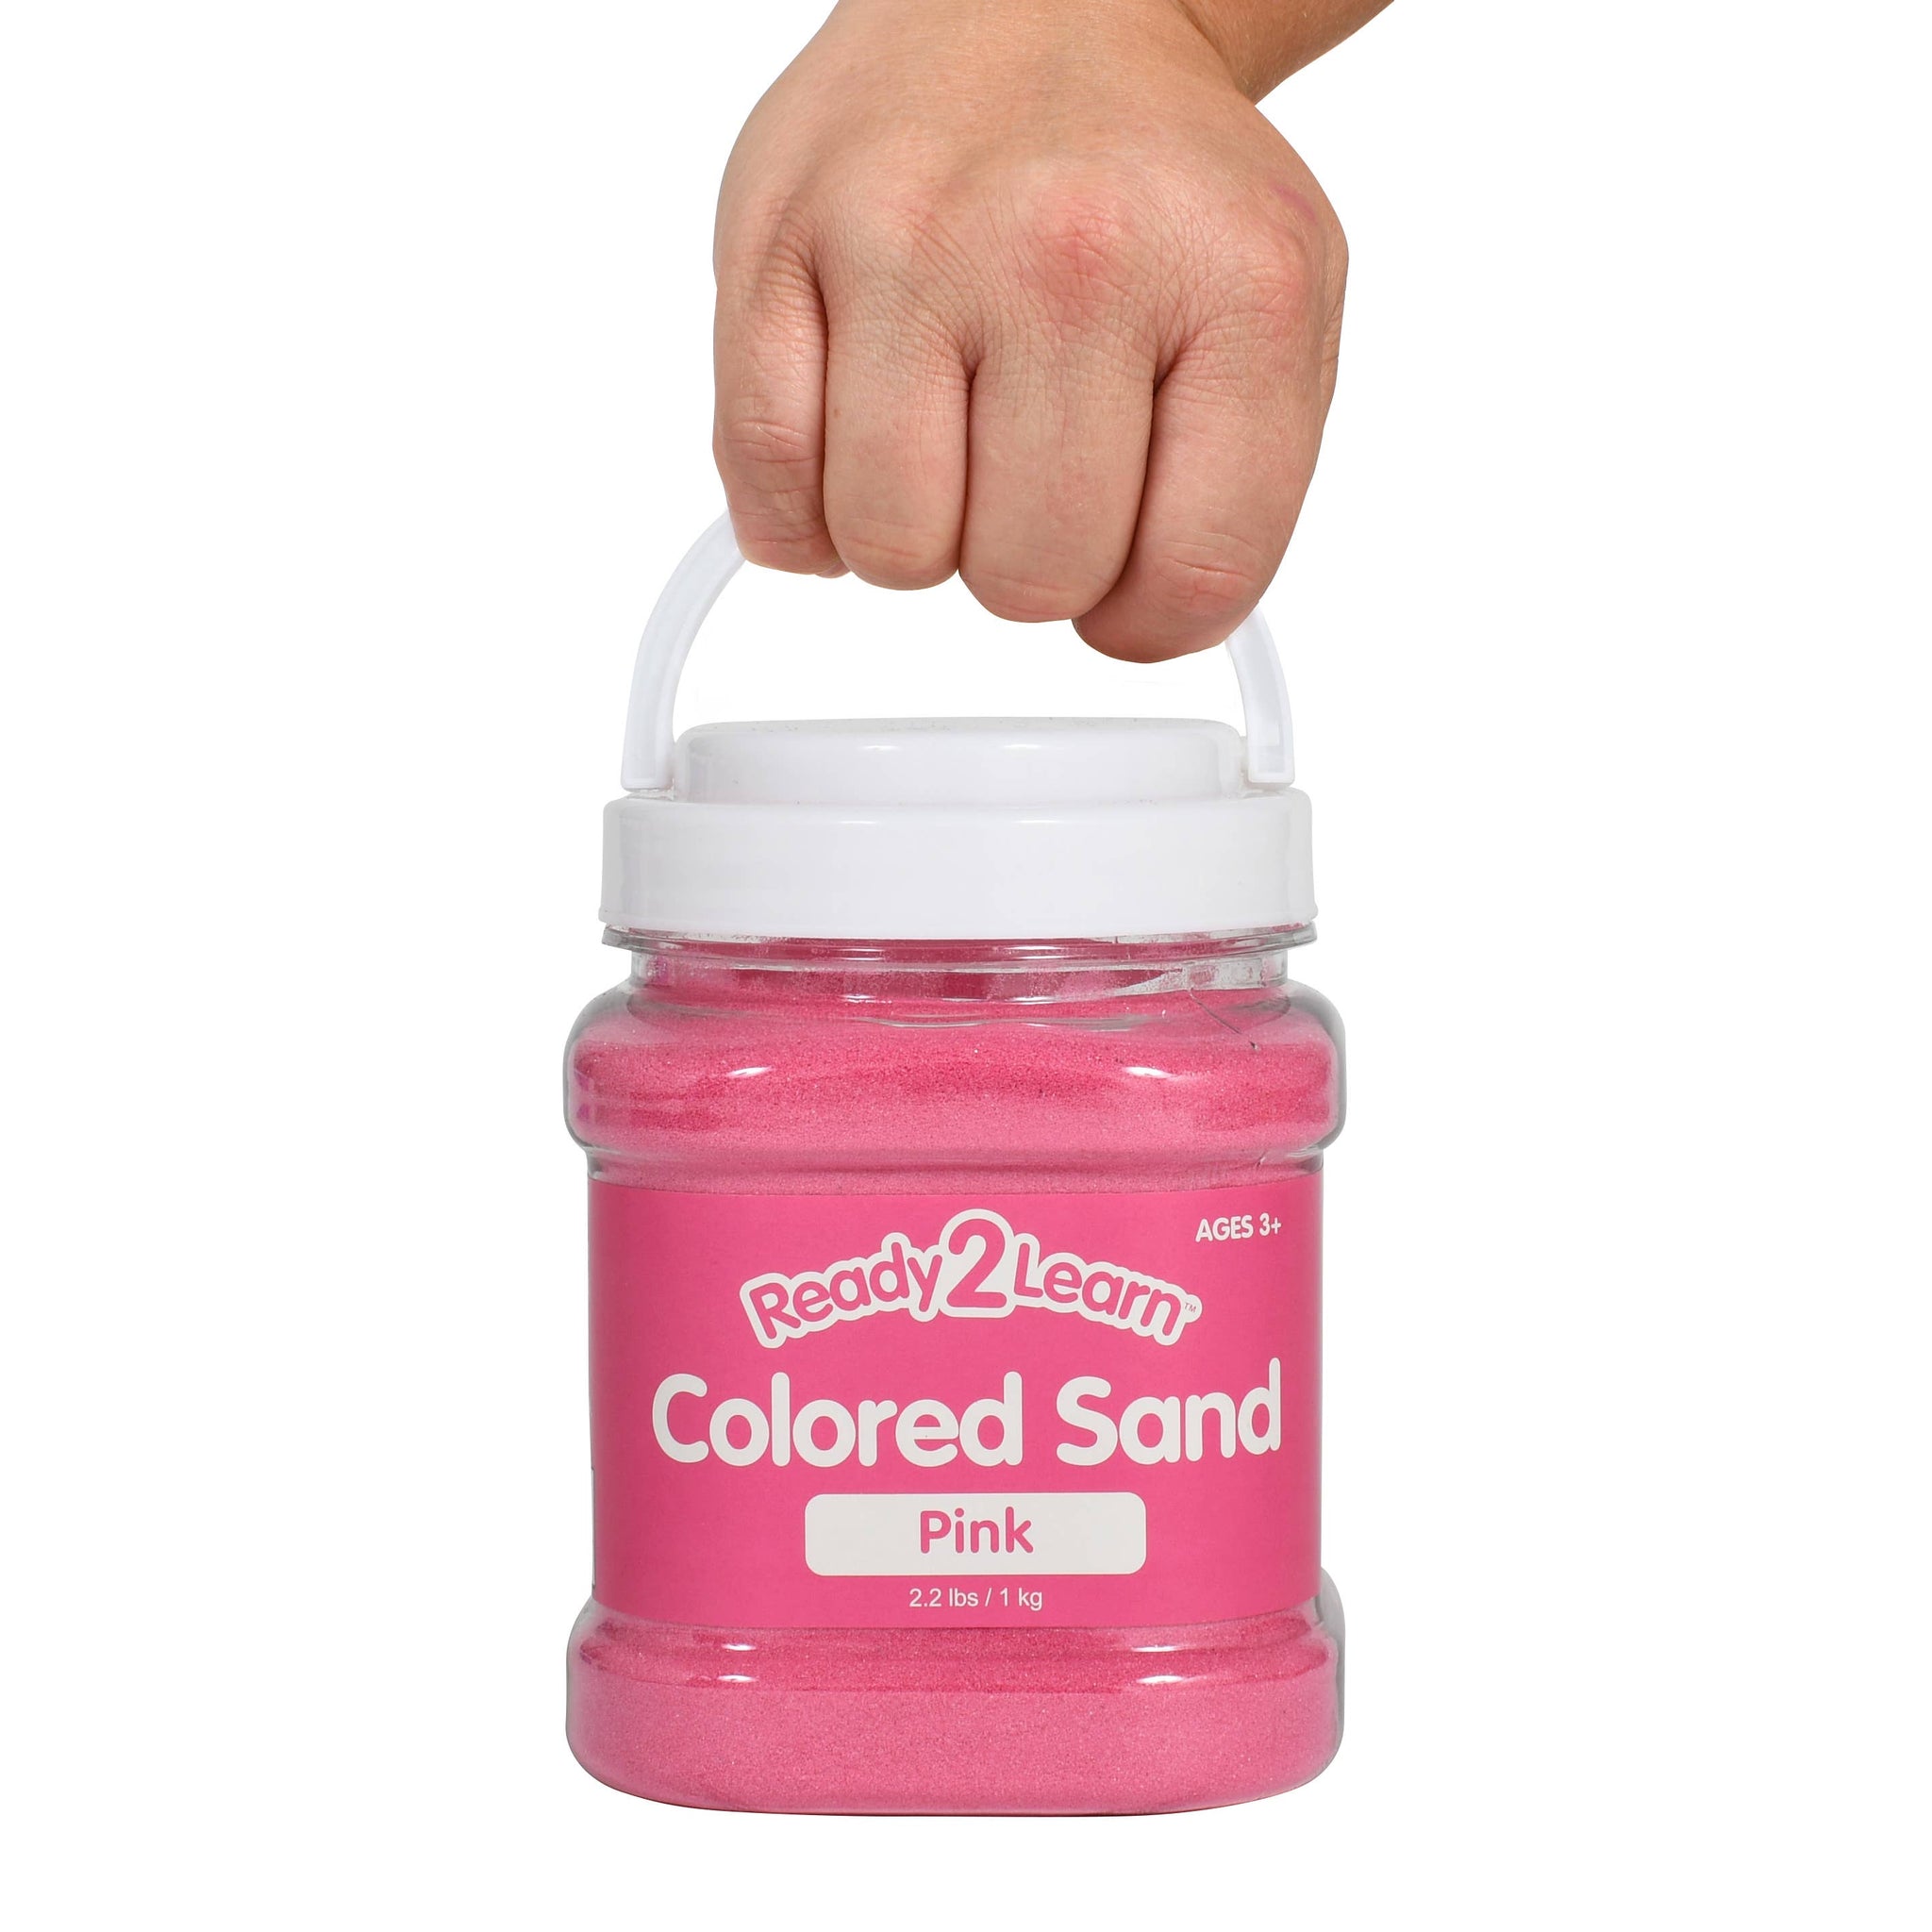 Colored Sand - Pink